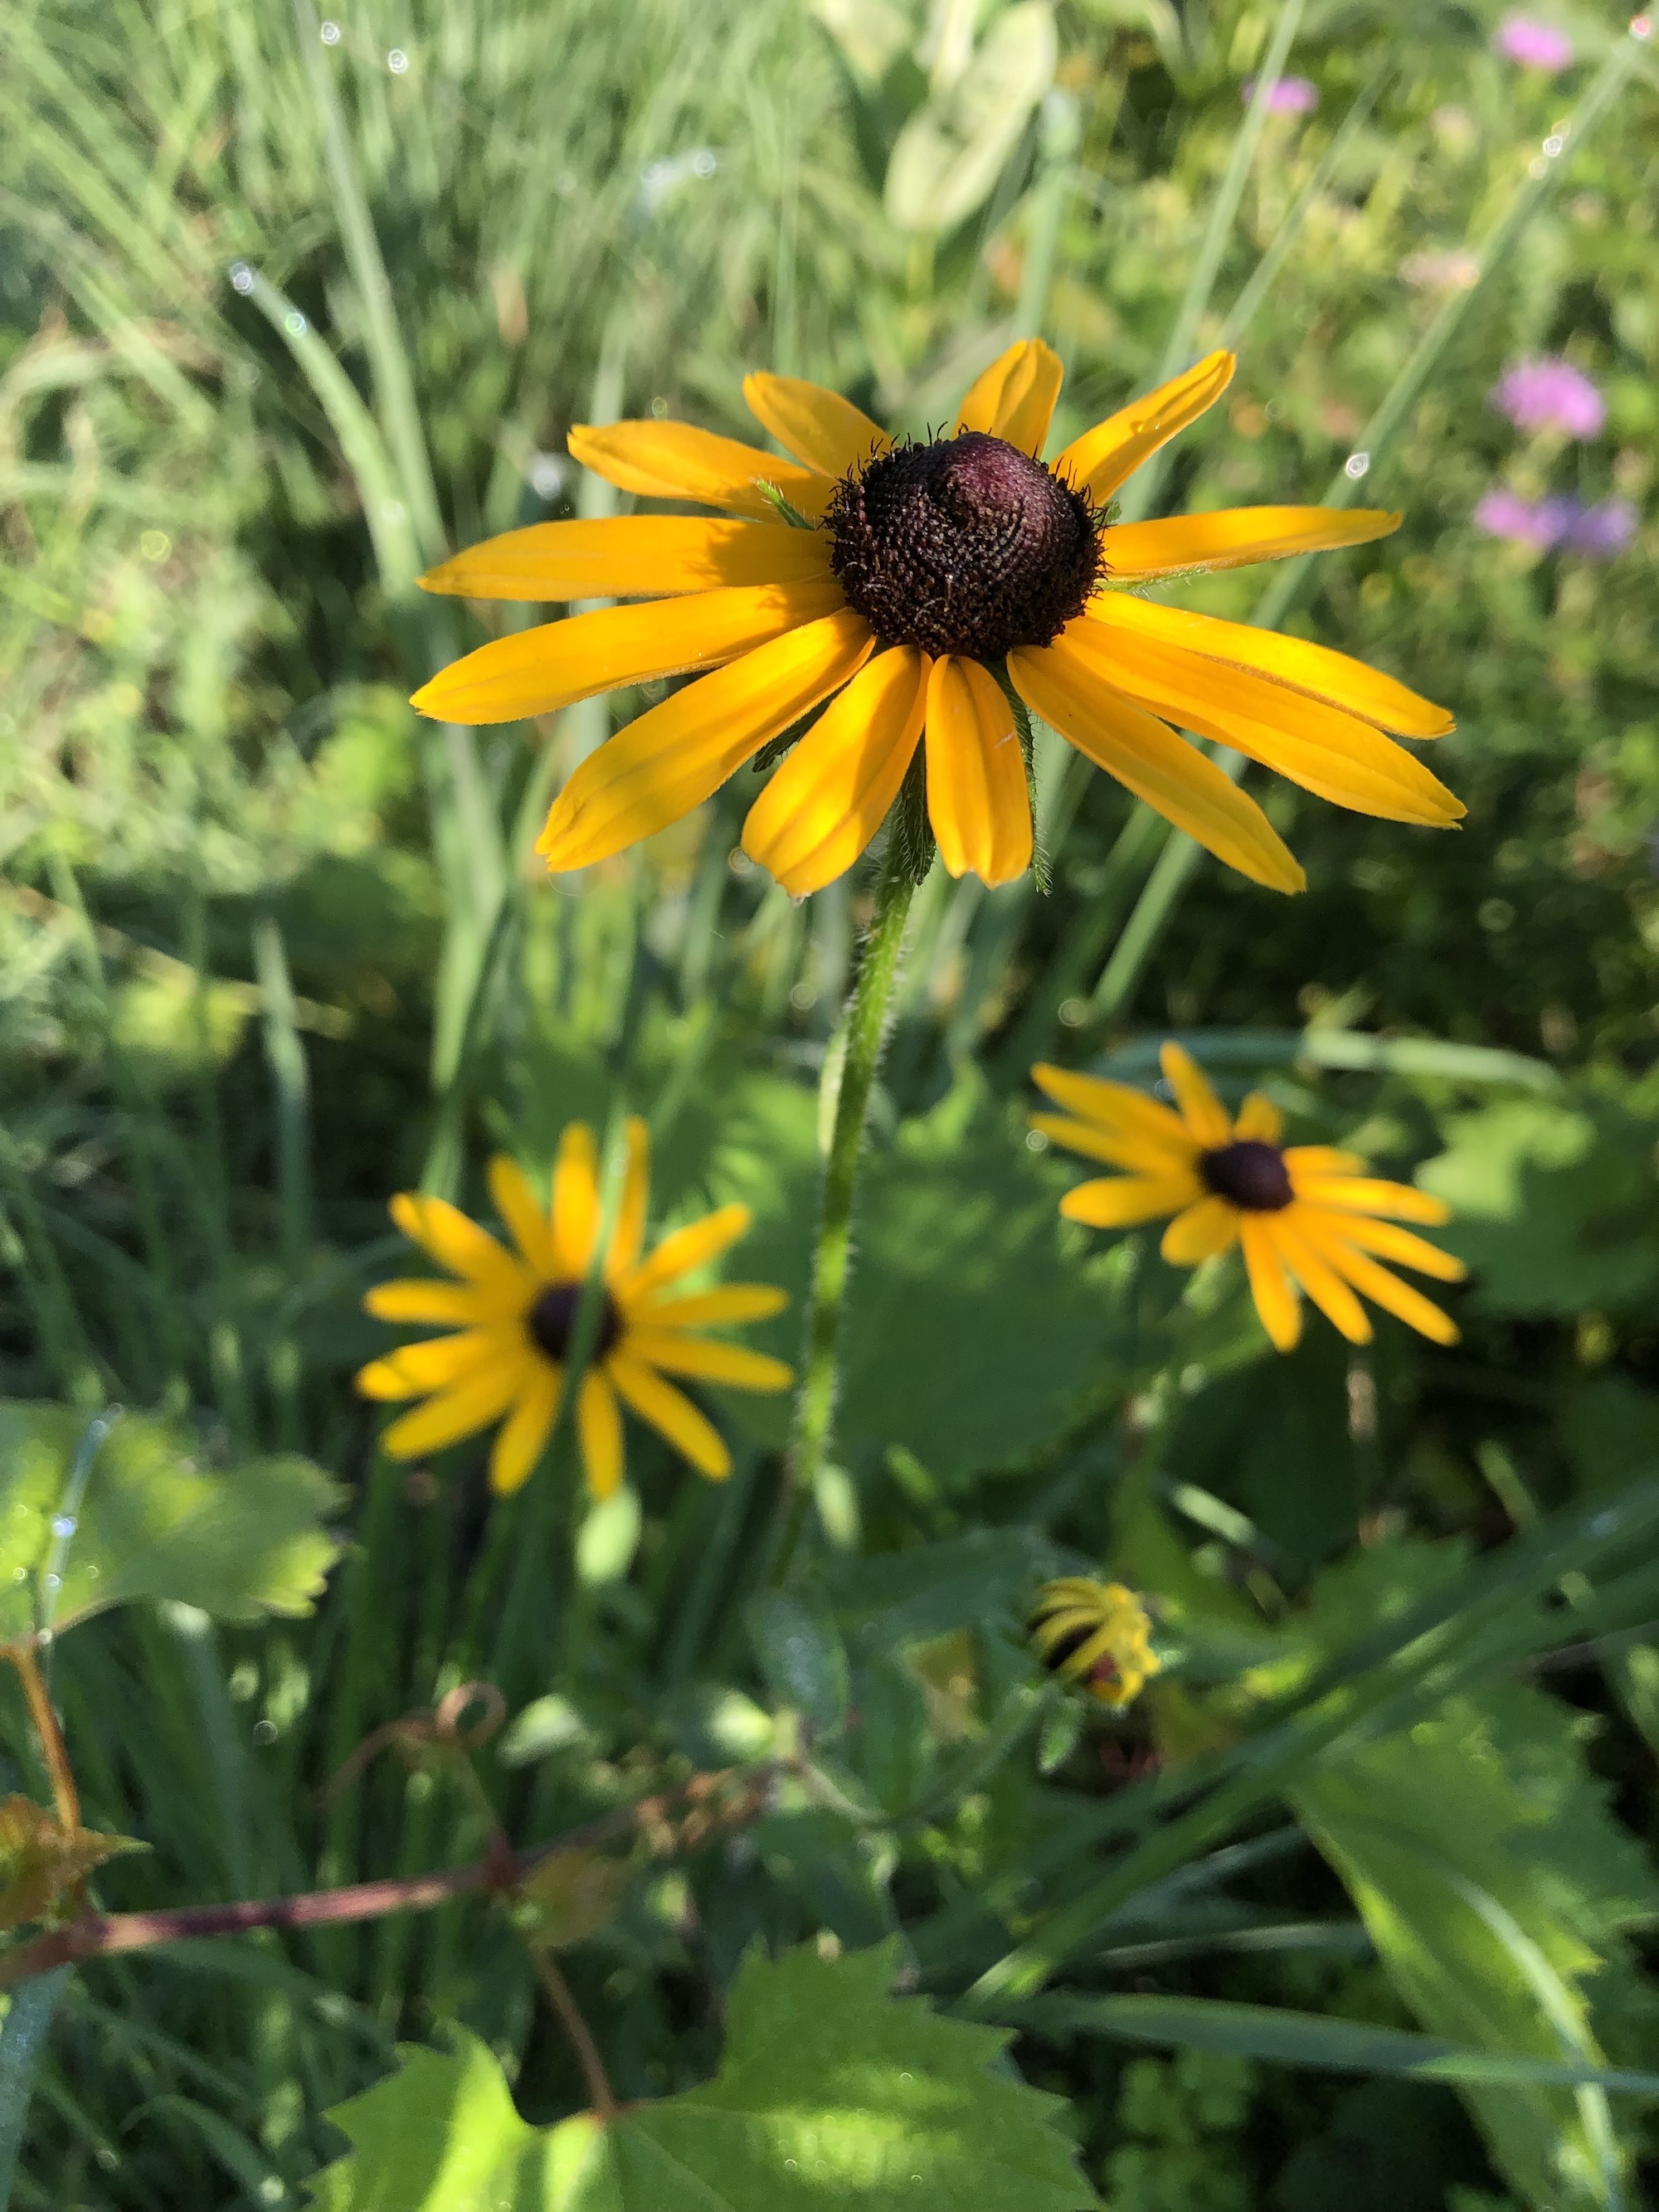 Black-eyed Susan on banks of Marion Dunn Pond in Madison, Wisconsin on July 1 2021.